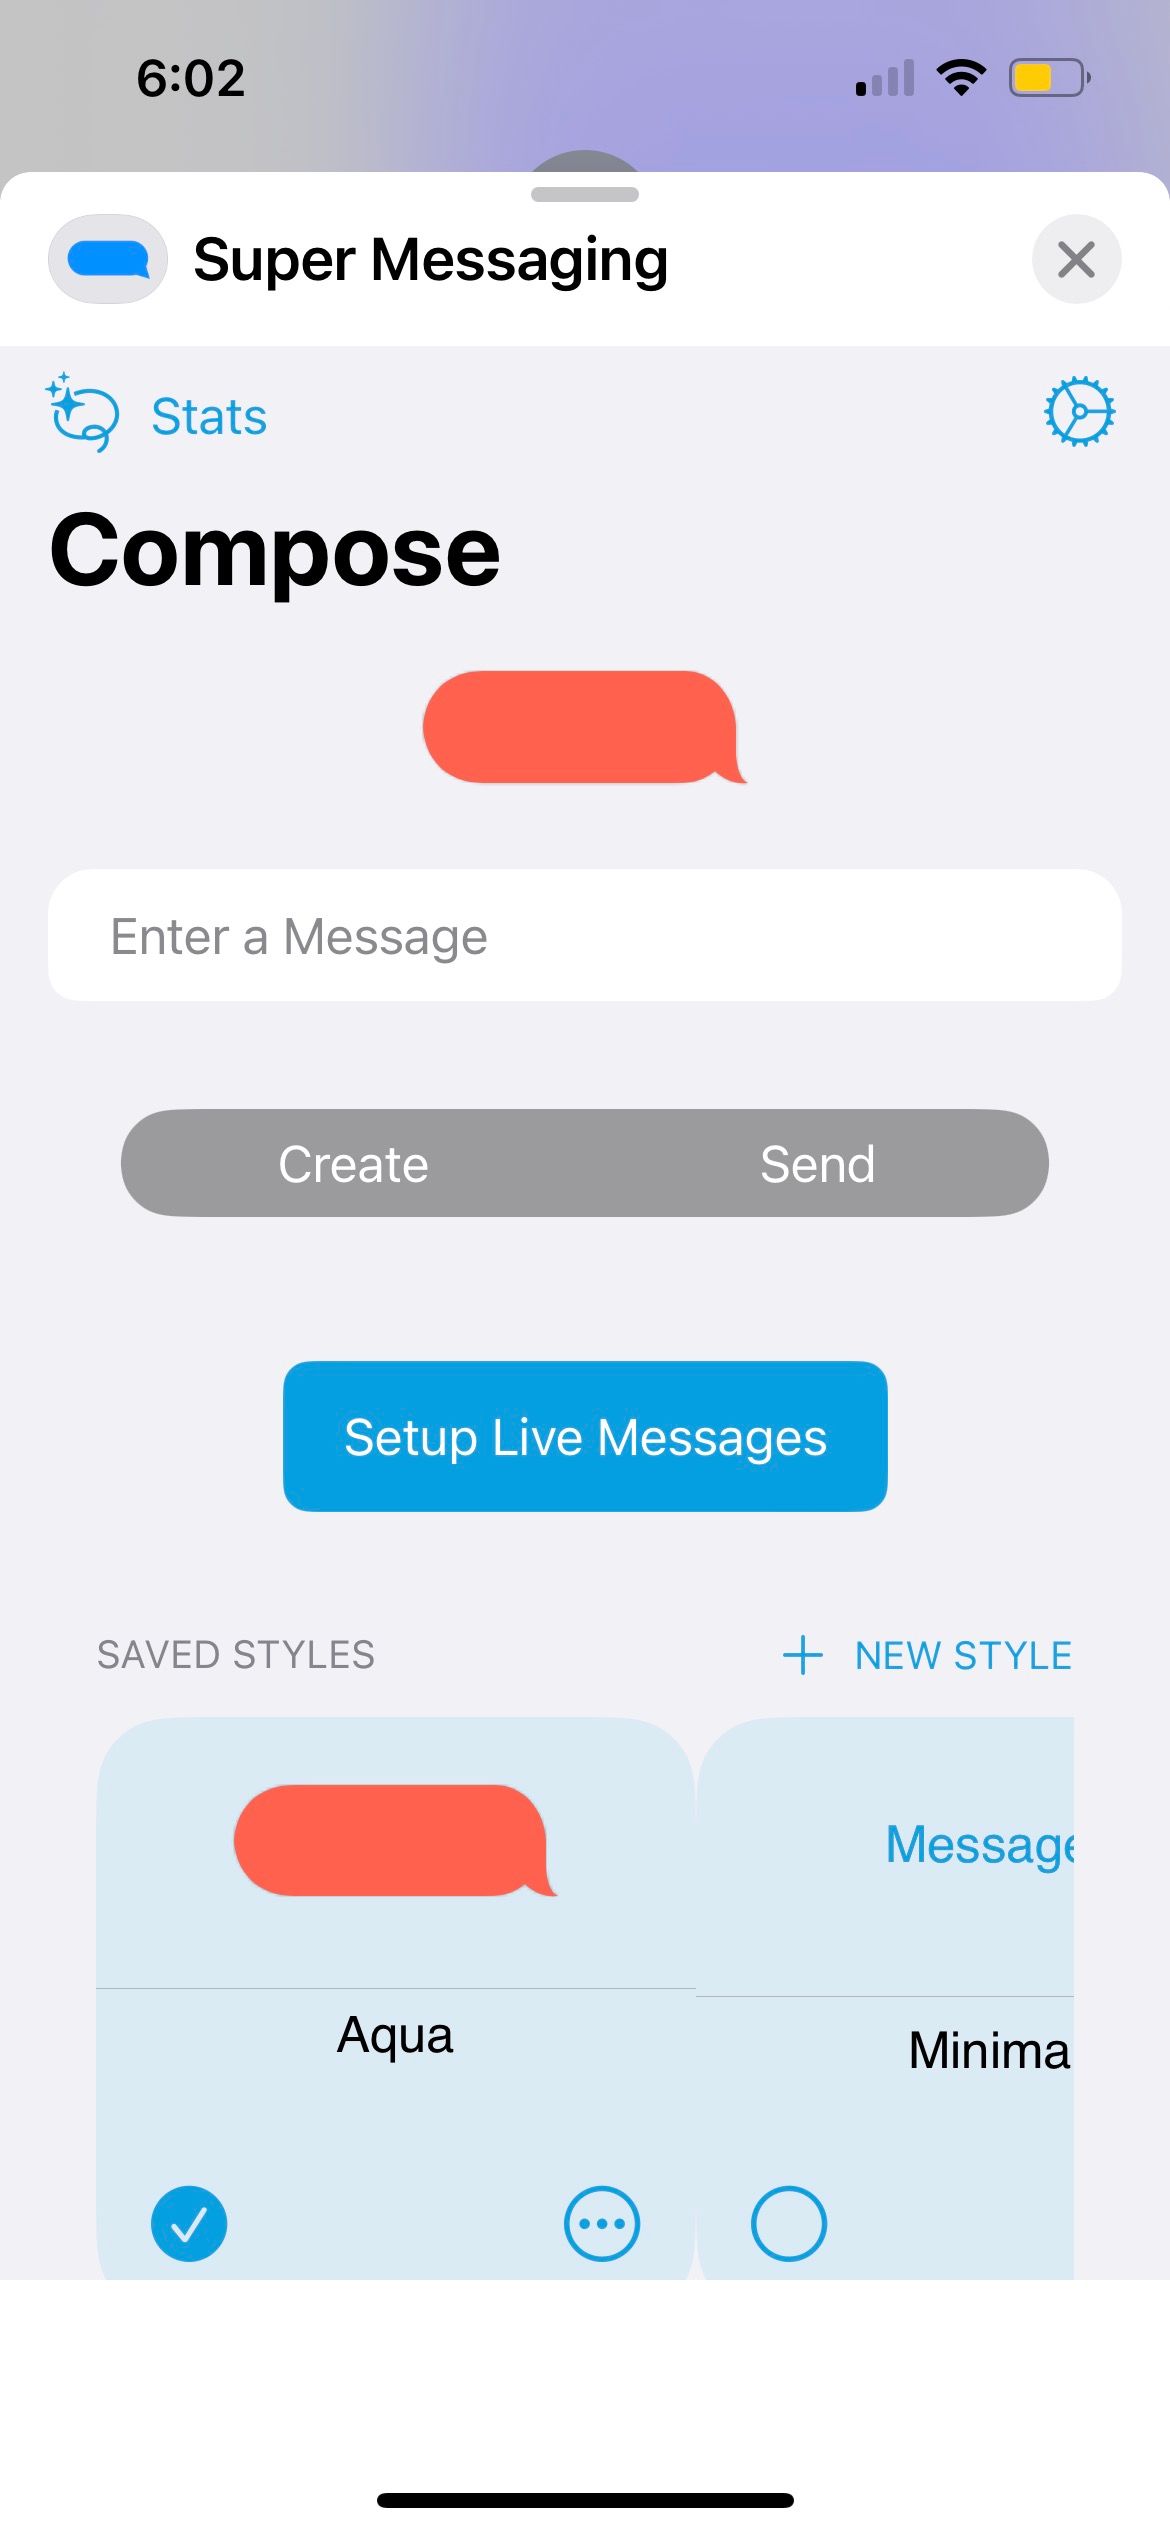 selected text message style in super messaging